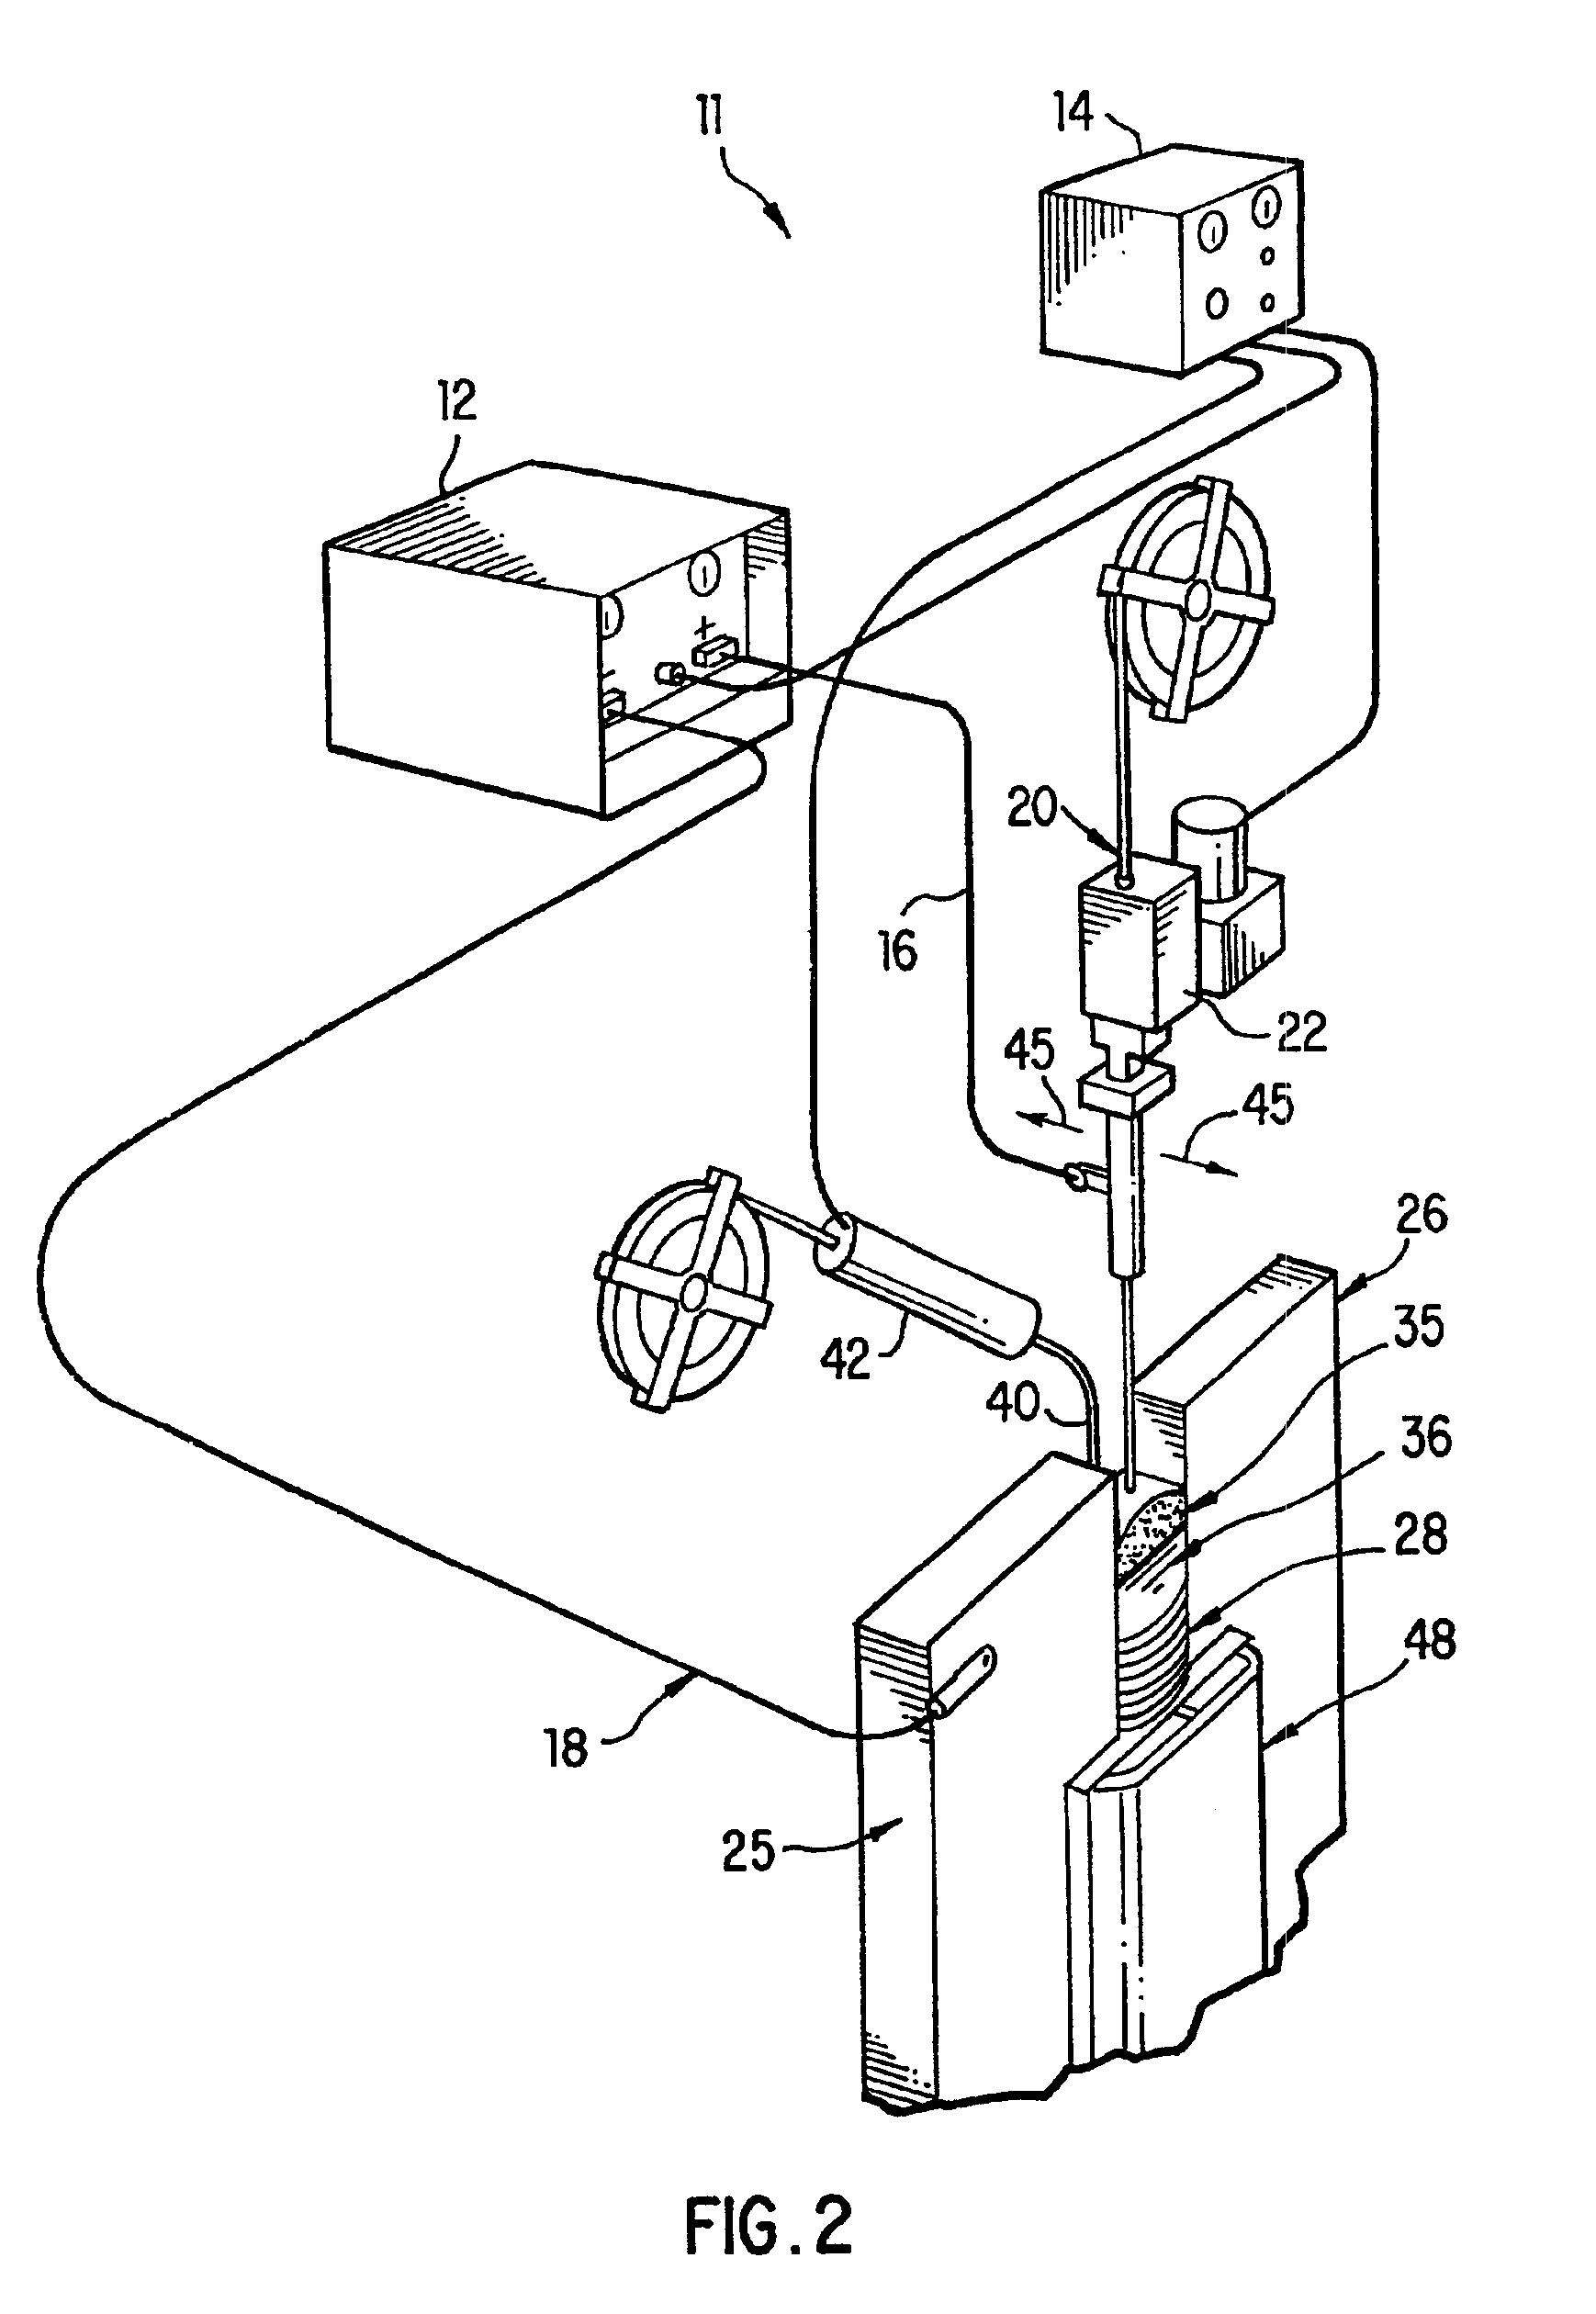 Controlled composition welding method